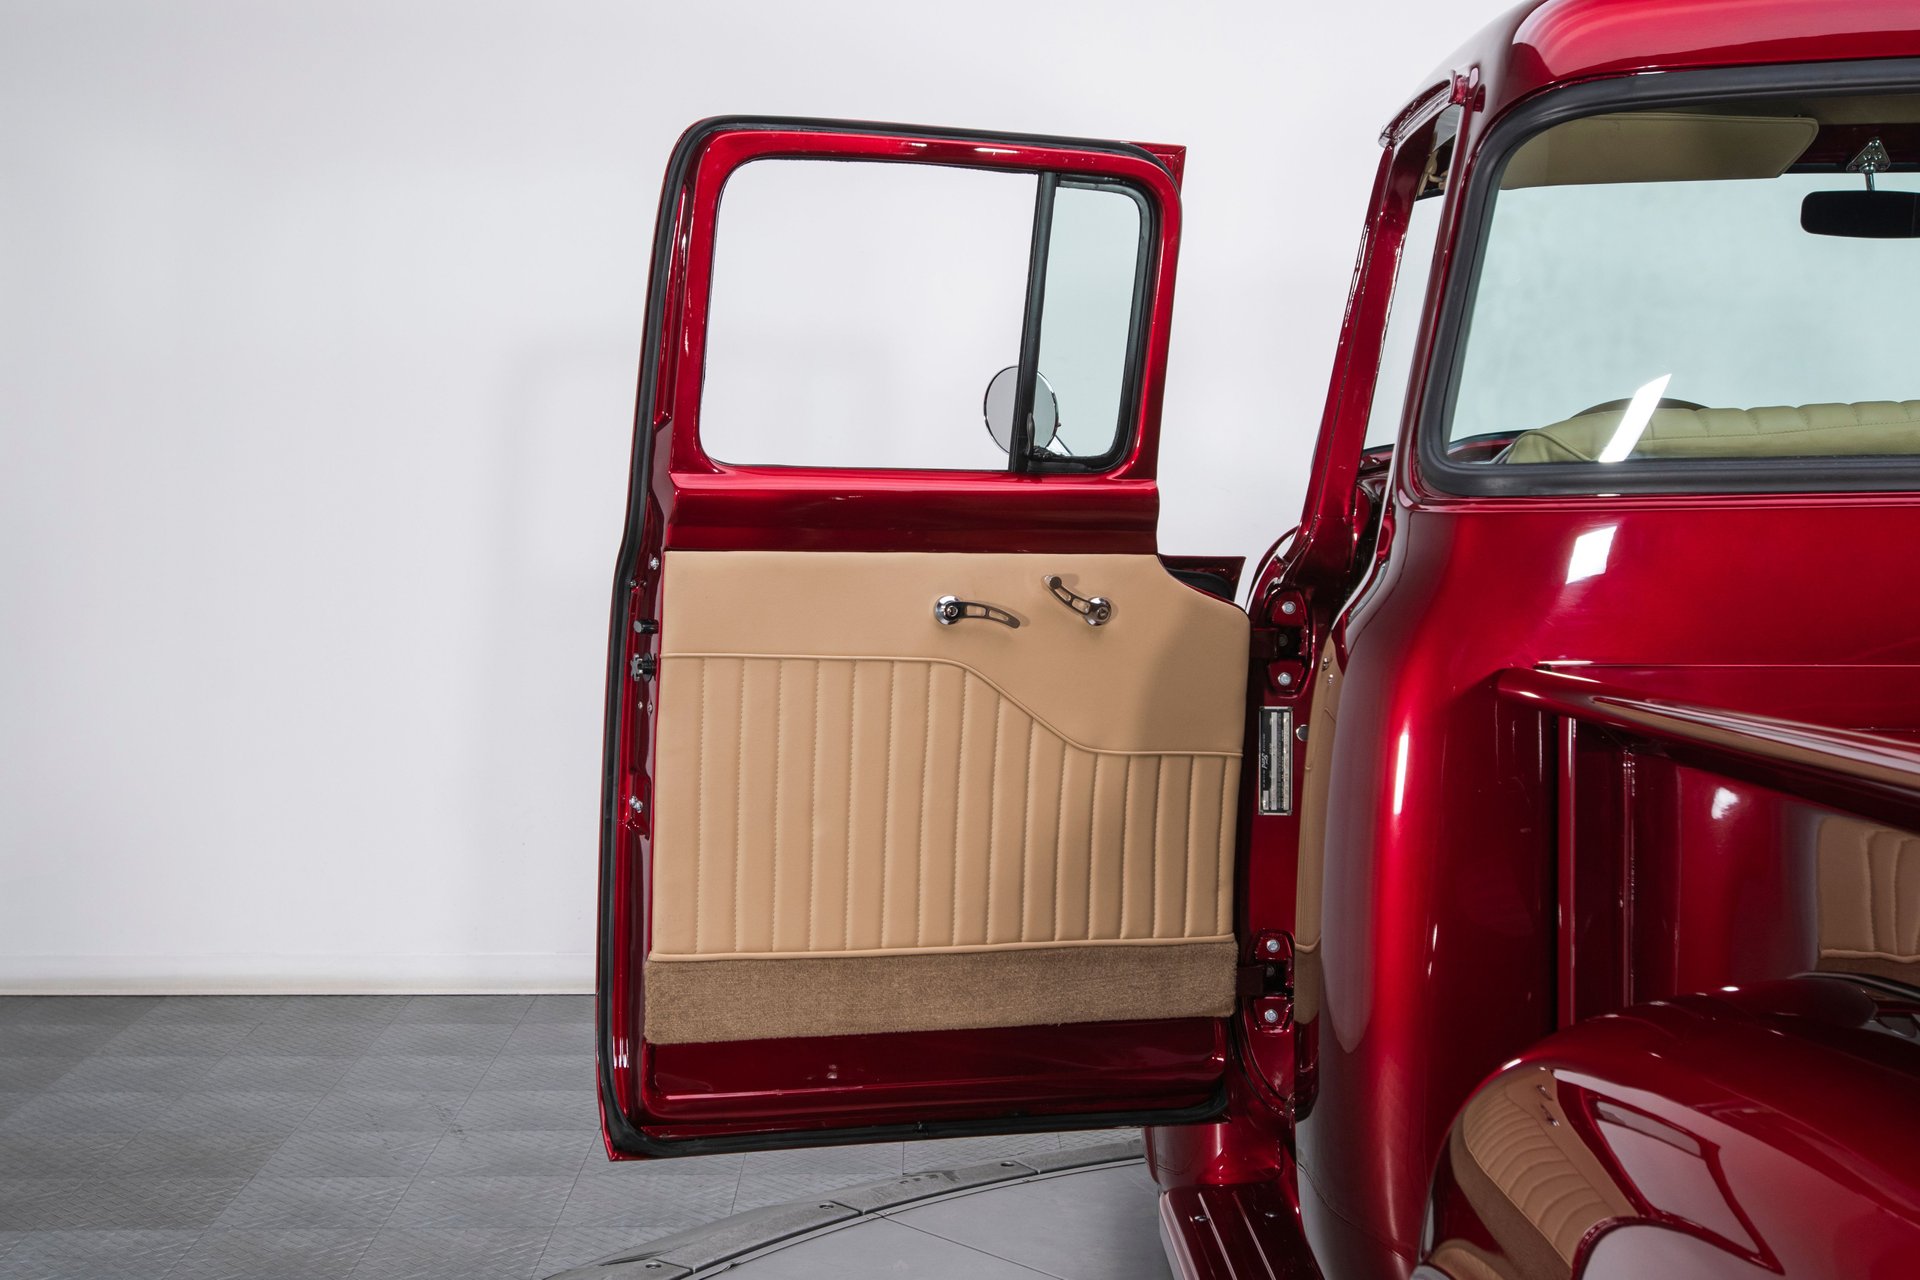 RK Motors Charlotte on X: Anyone in the mood for a little candy? House Of Kolor  Brandywine candy, that is. 😉 #Ford #F100 #FordTrucks #FordNation #FordF100  #V8 #Truck #Pickup #ClassicCars #ClassicCarsDaily #HouseOfKolor #